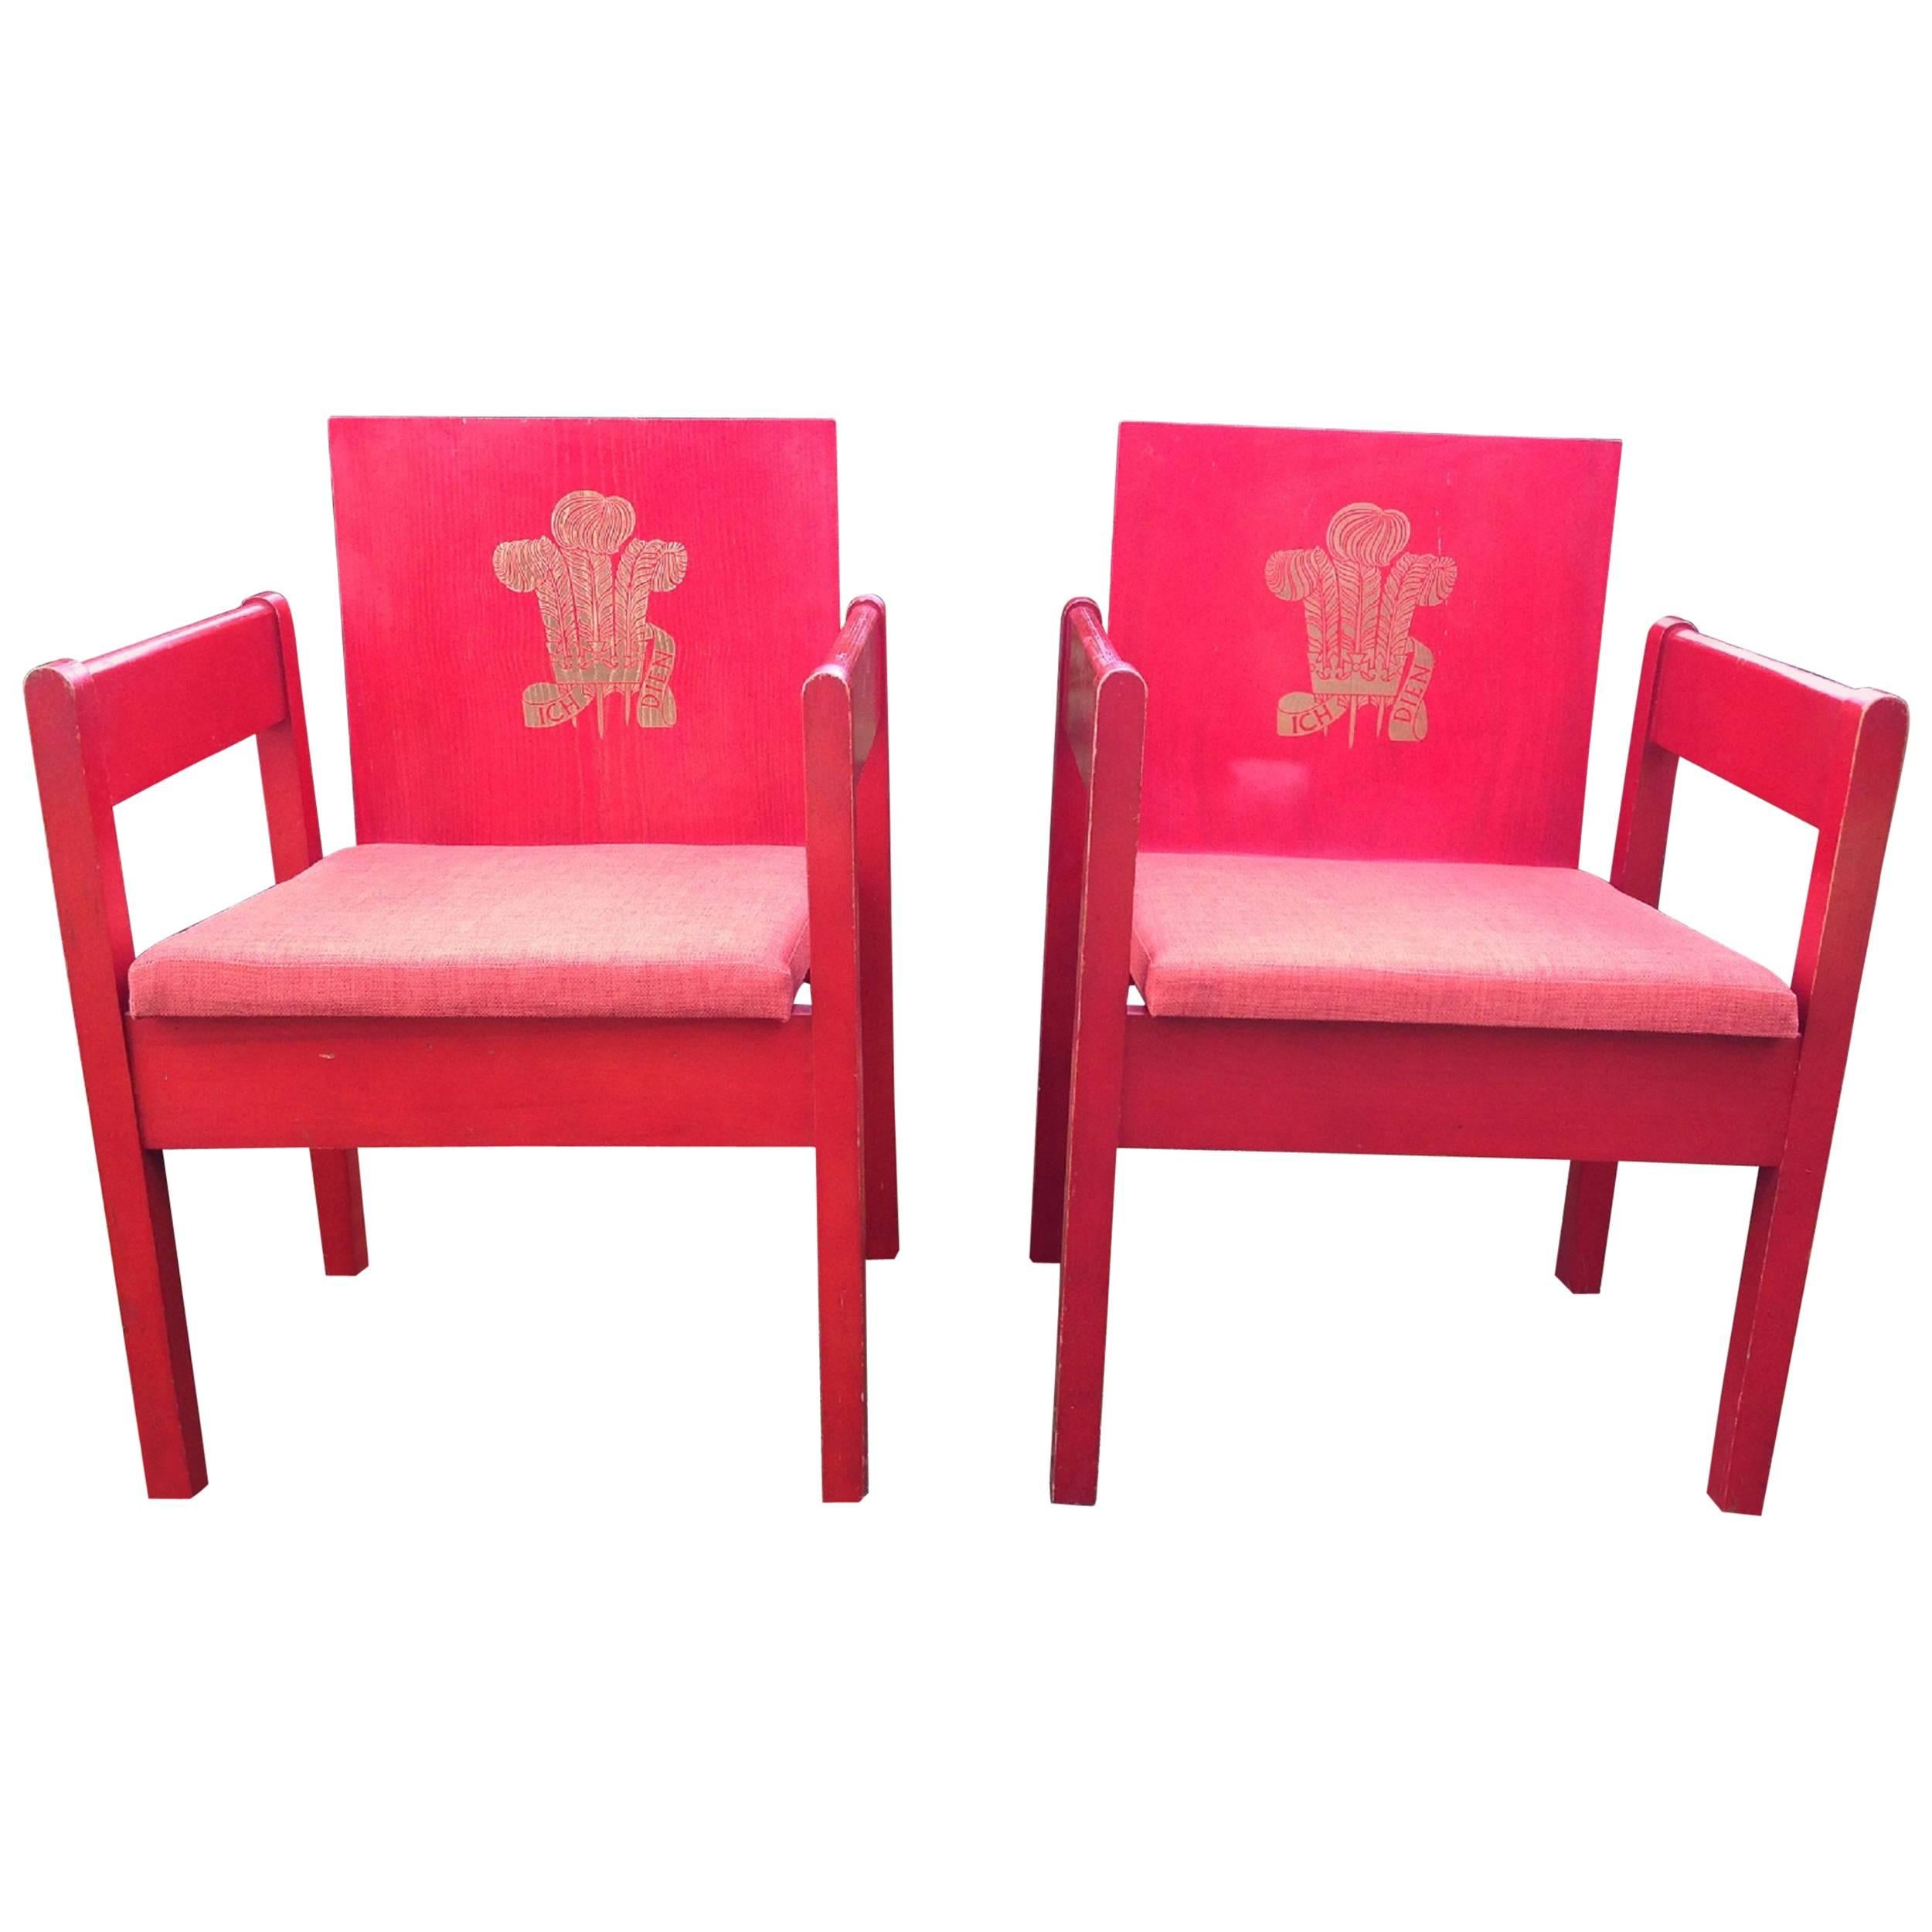 Pair of Investiture Chairs, Lord Snowden Vermillion Stained Beech Ply circa 1969